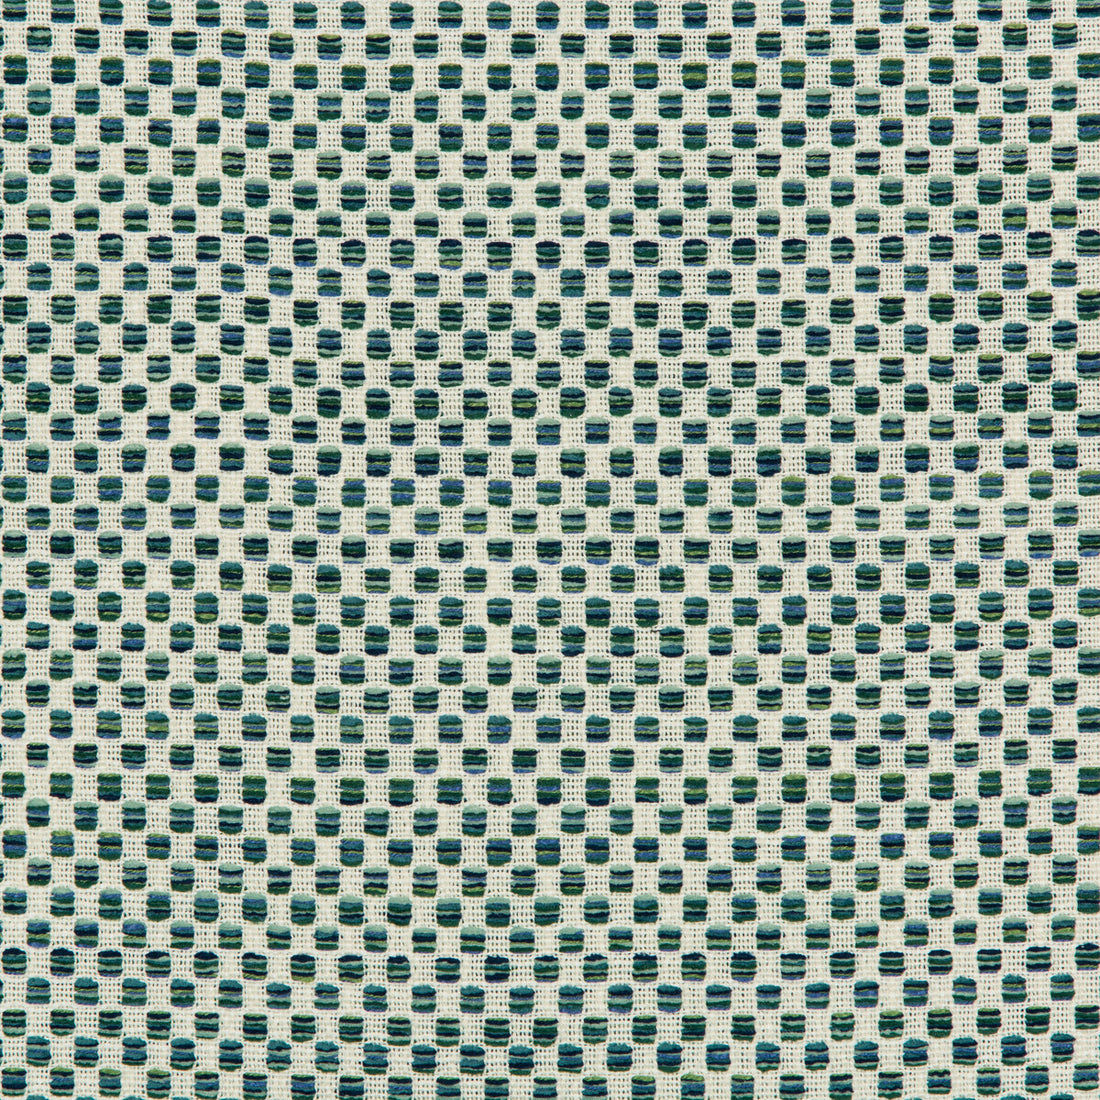 Kravet Design fabric in 36090-35 color - pattern 36090.35.0 - by Kravet Design in the Inside Out Performance Fabrics collection